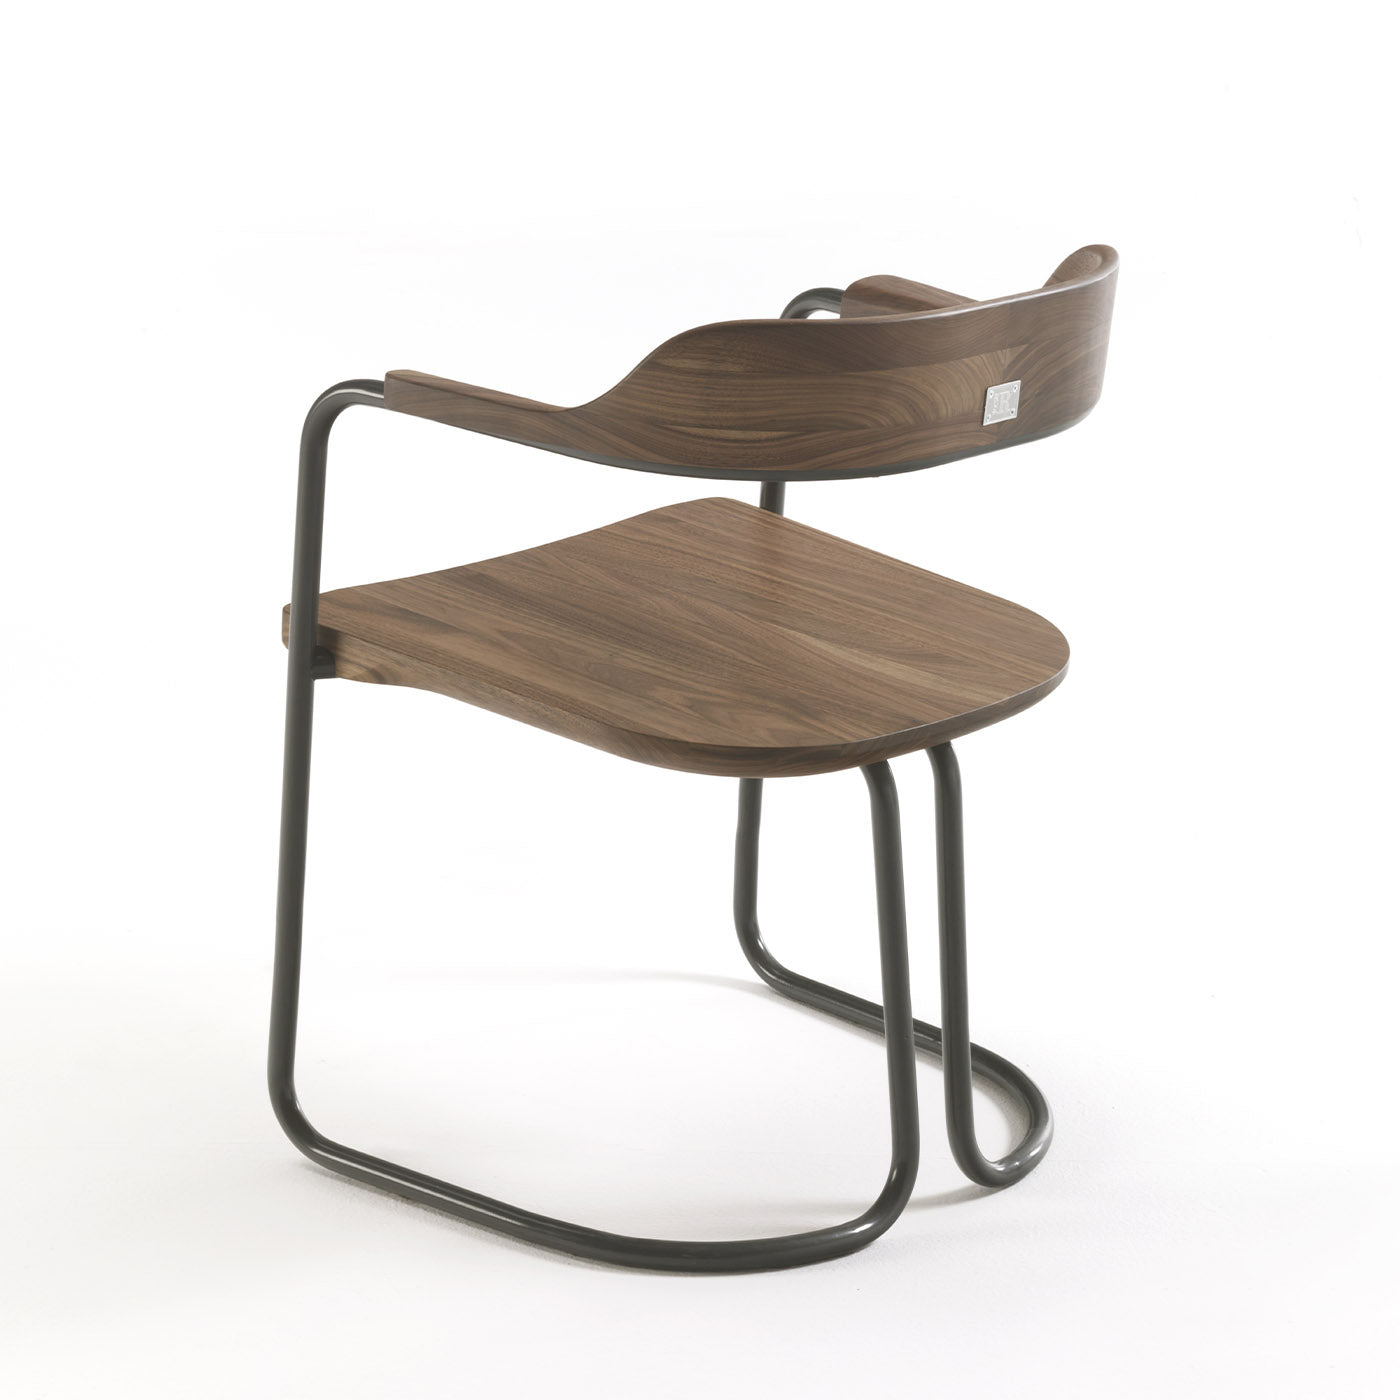 Tubular Anthracite-Gray Chair by Jamie Durie - Alternative view 2